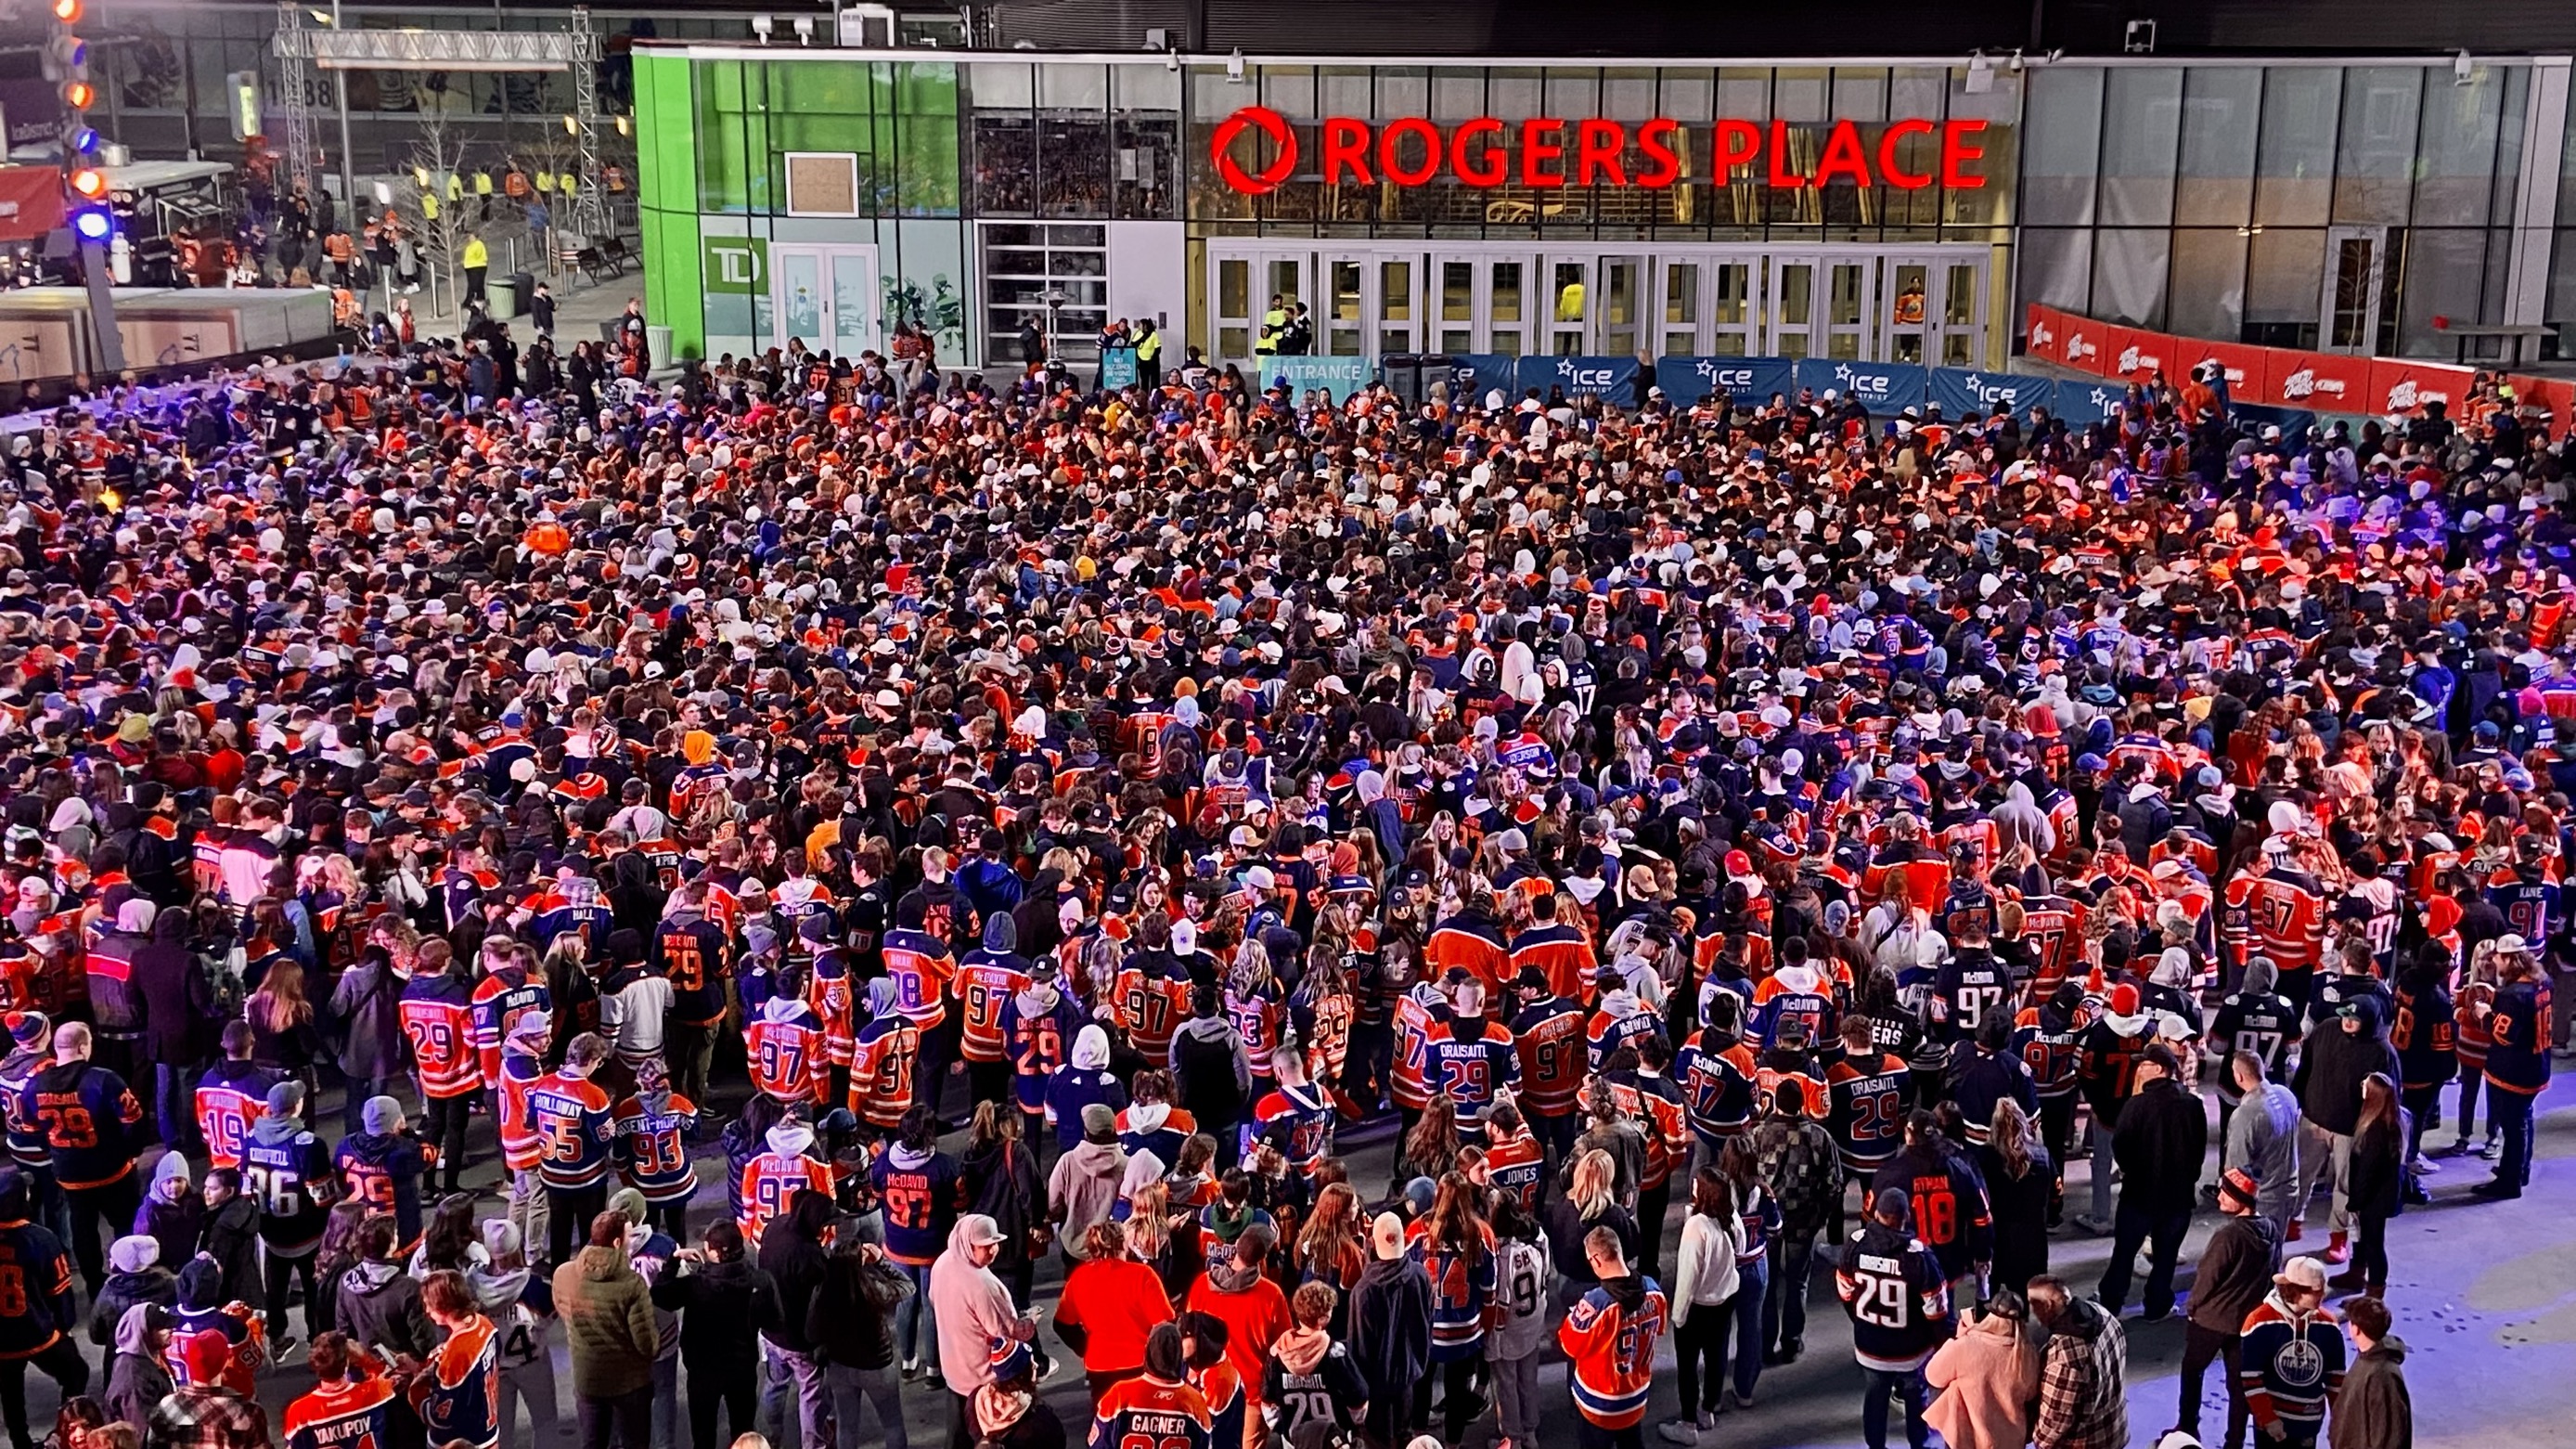 Edmonton Oilers watch parties at Ice District now 18+